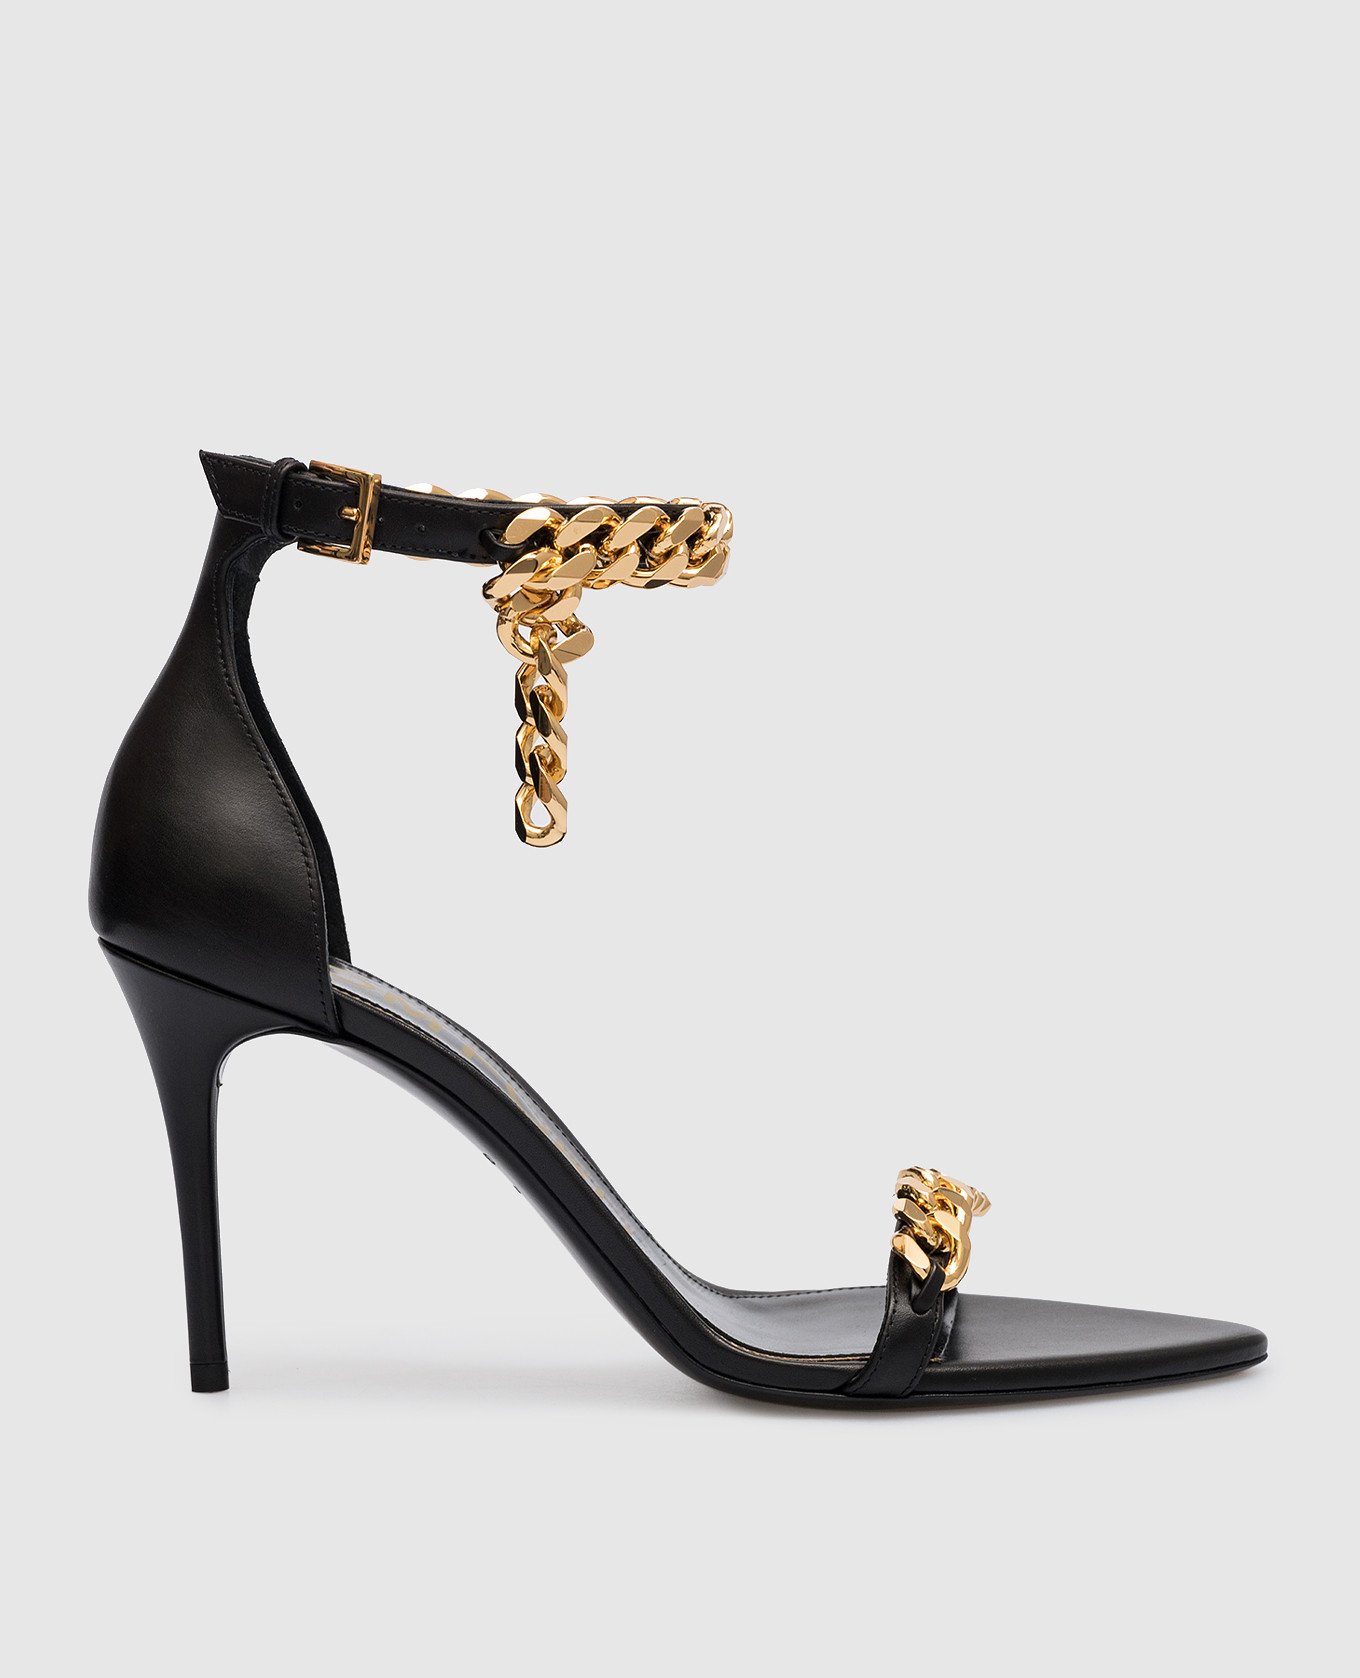 Black leather sandals with a chain